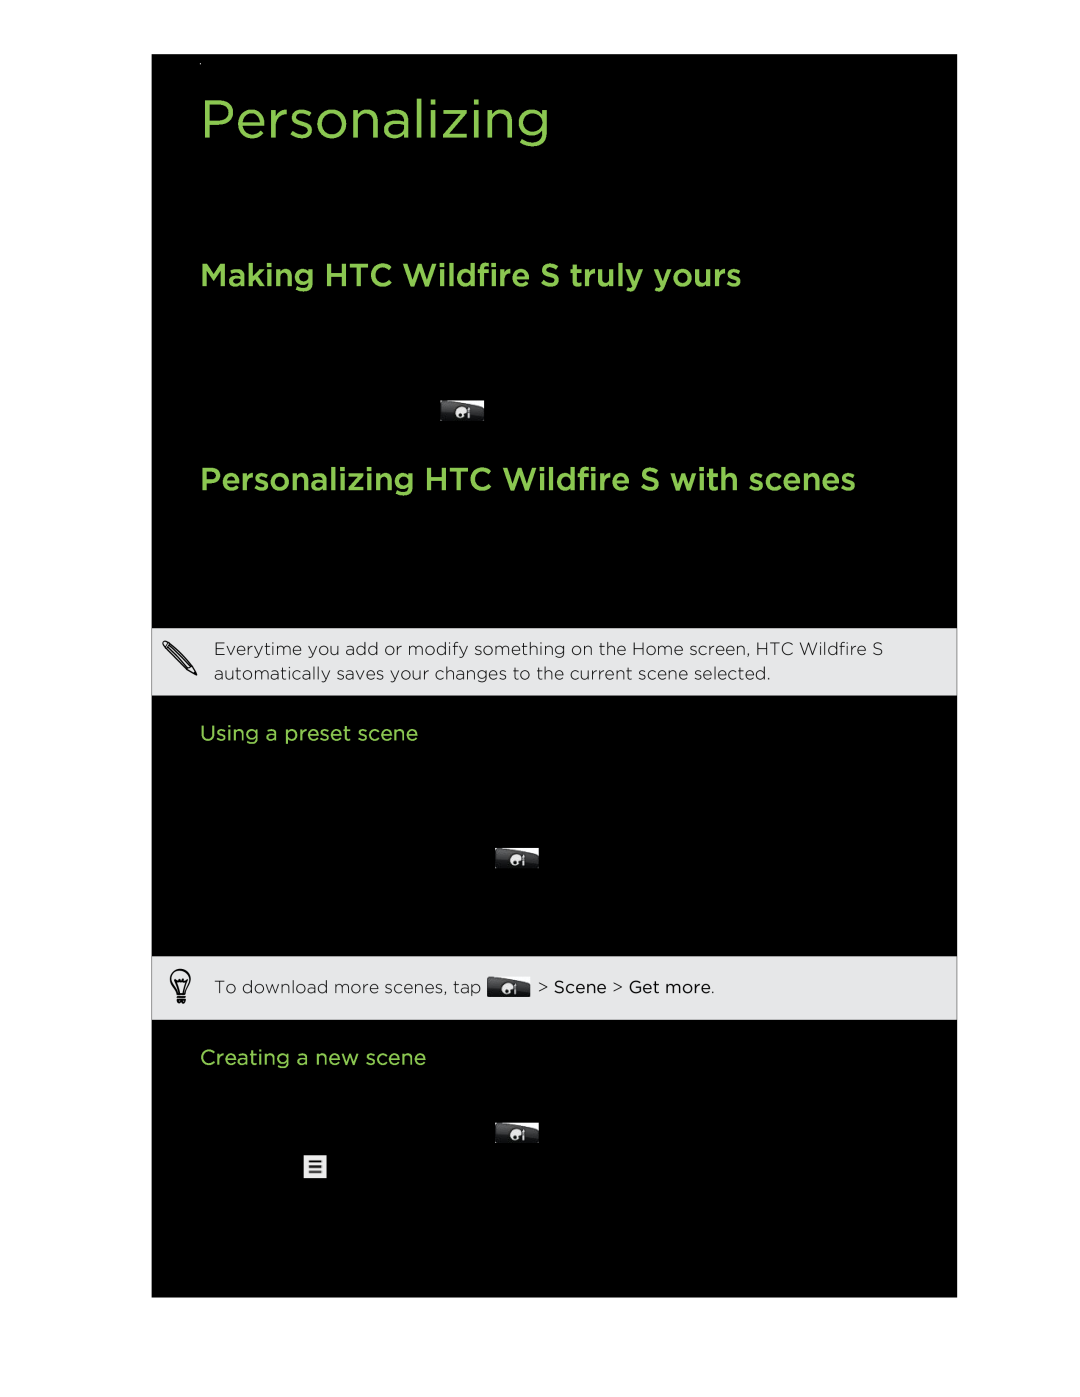 HTC manual Making HTC Wildfire S truly yours, Personalizing HTC Wildfire S with scenes, Using a preset scene 